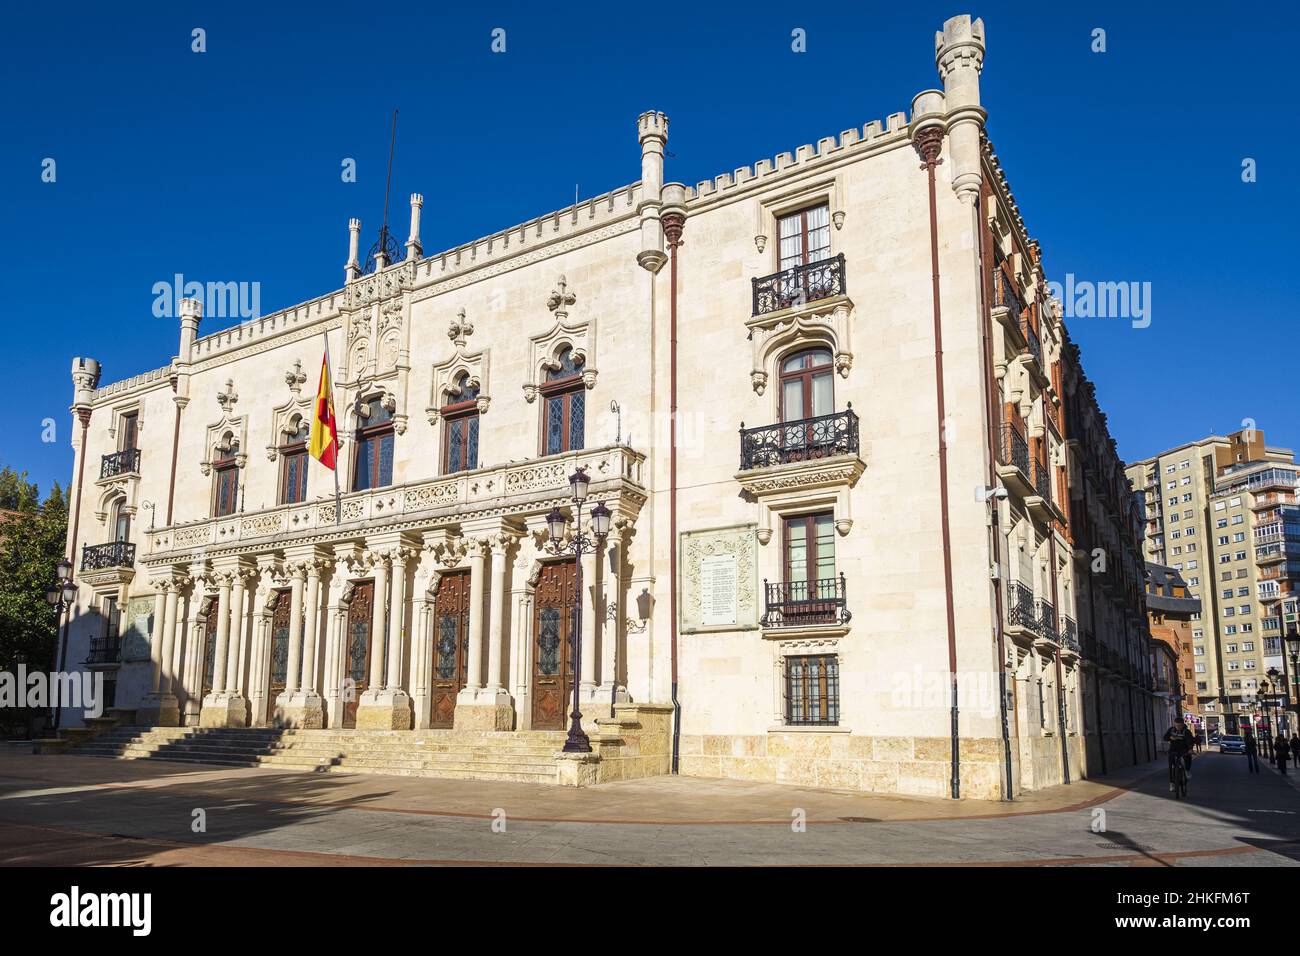 Spain, Castile and León, Burgos, stage on the Camino Francés, Spanish route of the pilgrimage to Santiago de Compostela, listed as a UNESCO World Heritage Site, the Palace of the General Captaincy houses the Military Museum Stock Photo